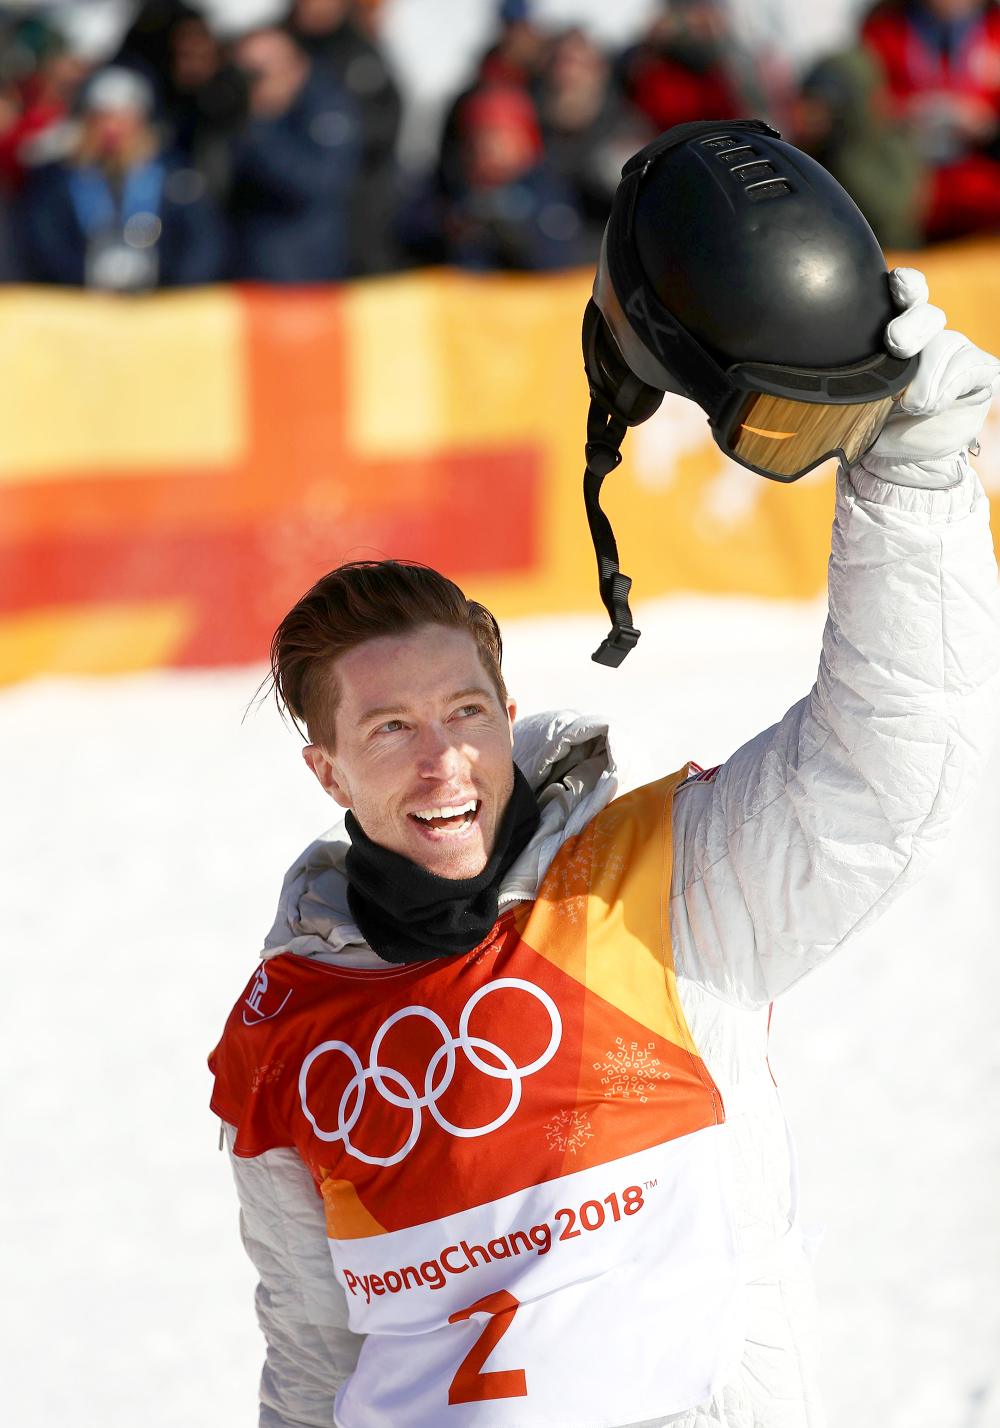 Remembering The Day Shaun White Dominated The Halfpipe In